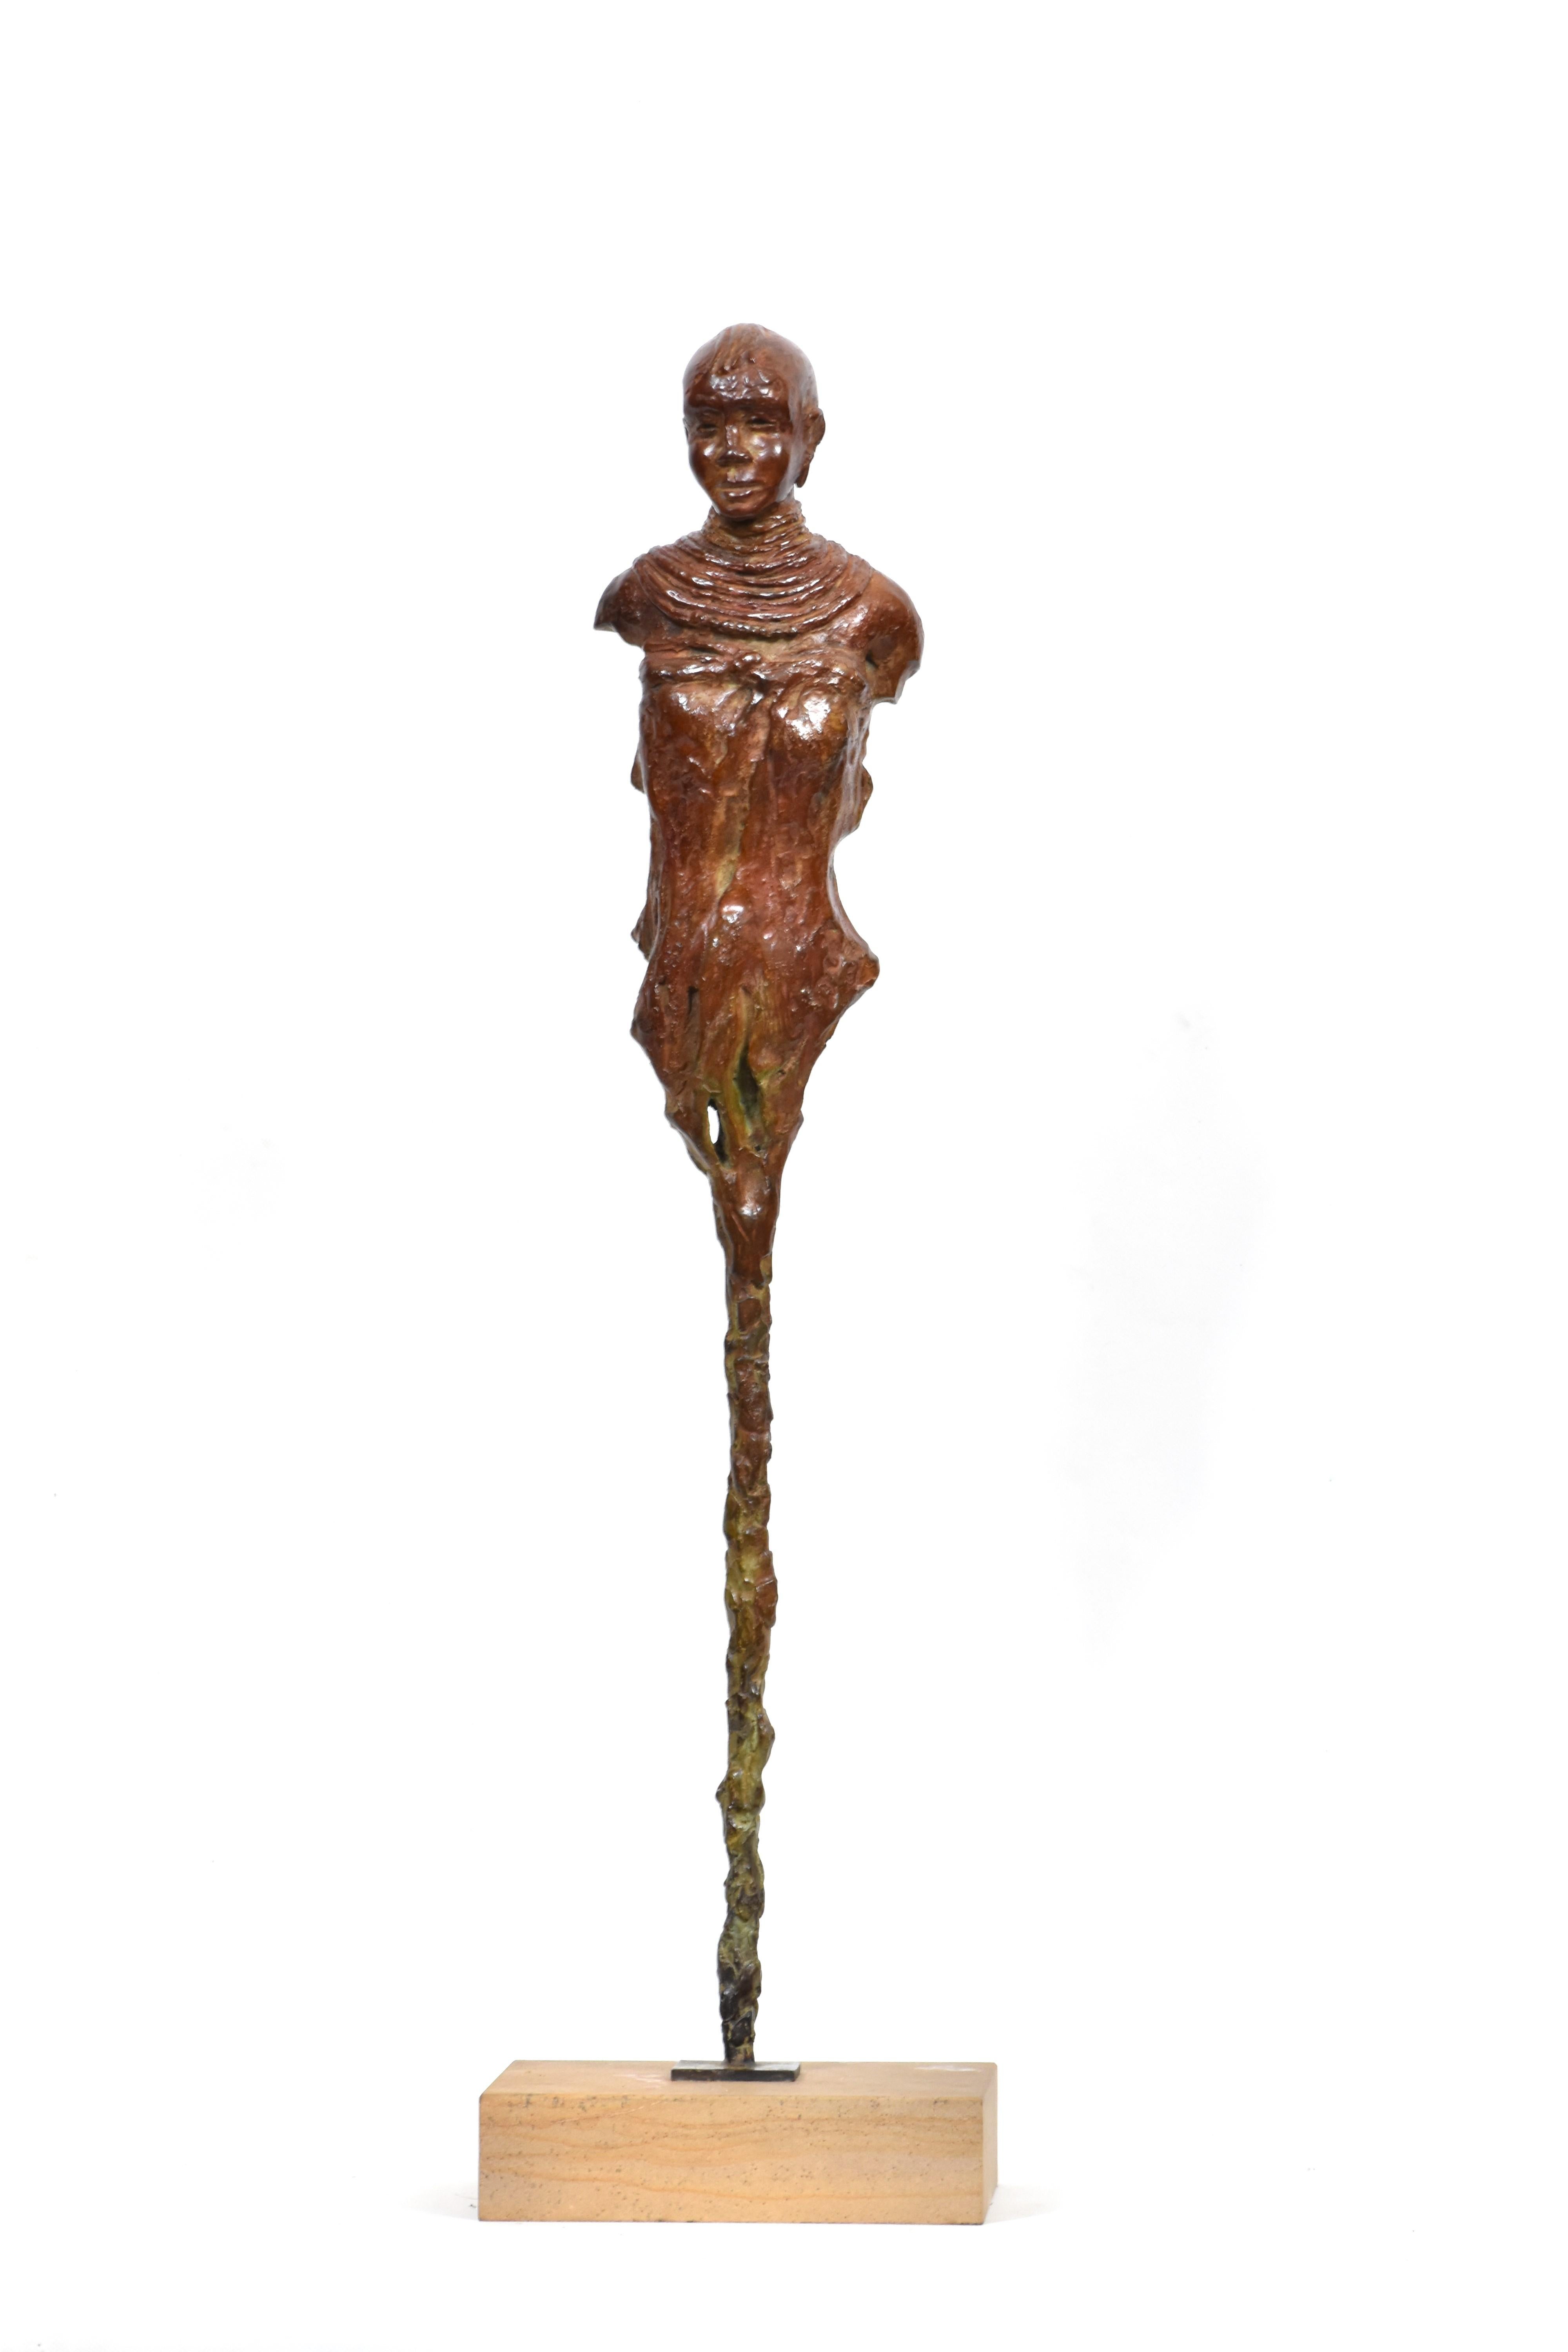 Bronze sculpture of young Turkana girl in traditional attire and characteristic hair style. The Turkana tribe, nomadic by nature, are a Nilotic people native to the Turkana District in northwest Kenya, a semi-arid climate region bordering Lake